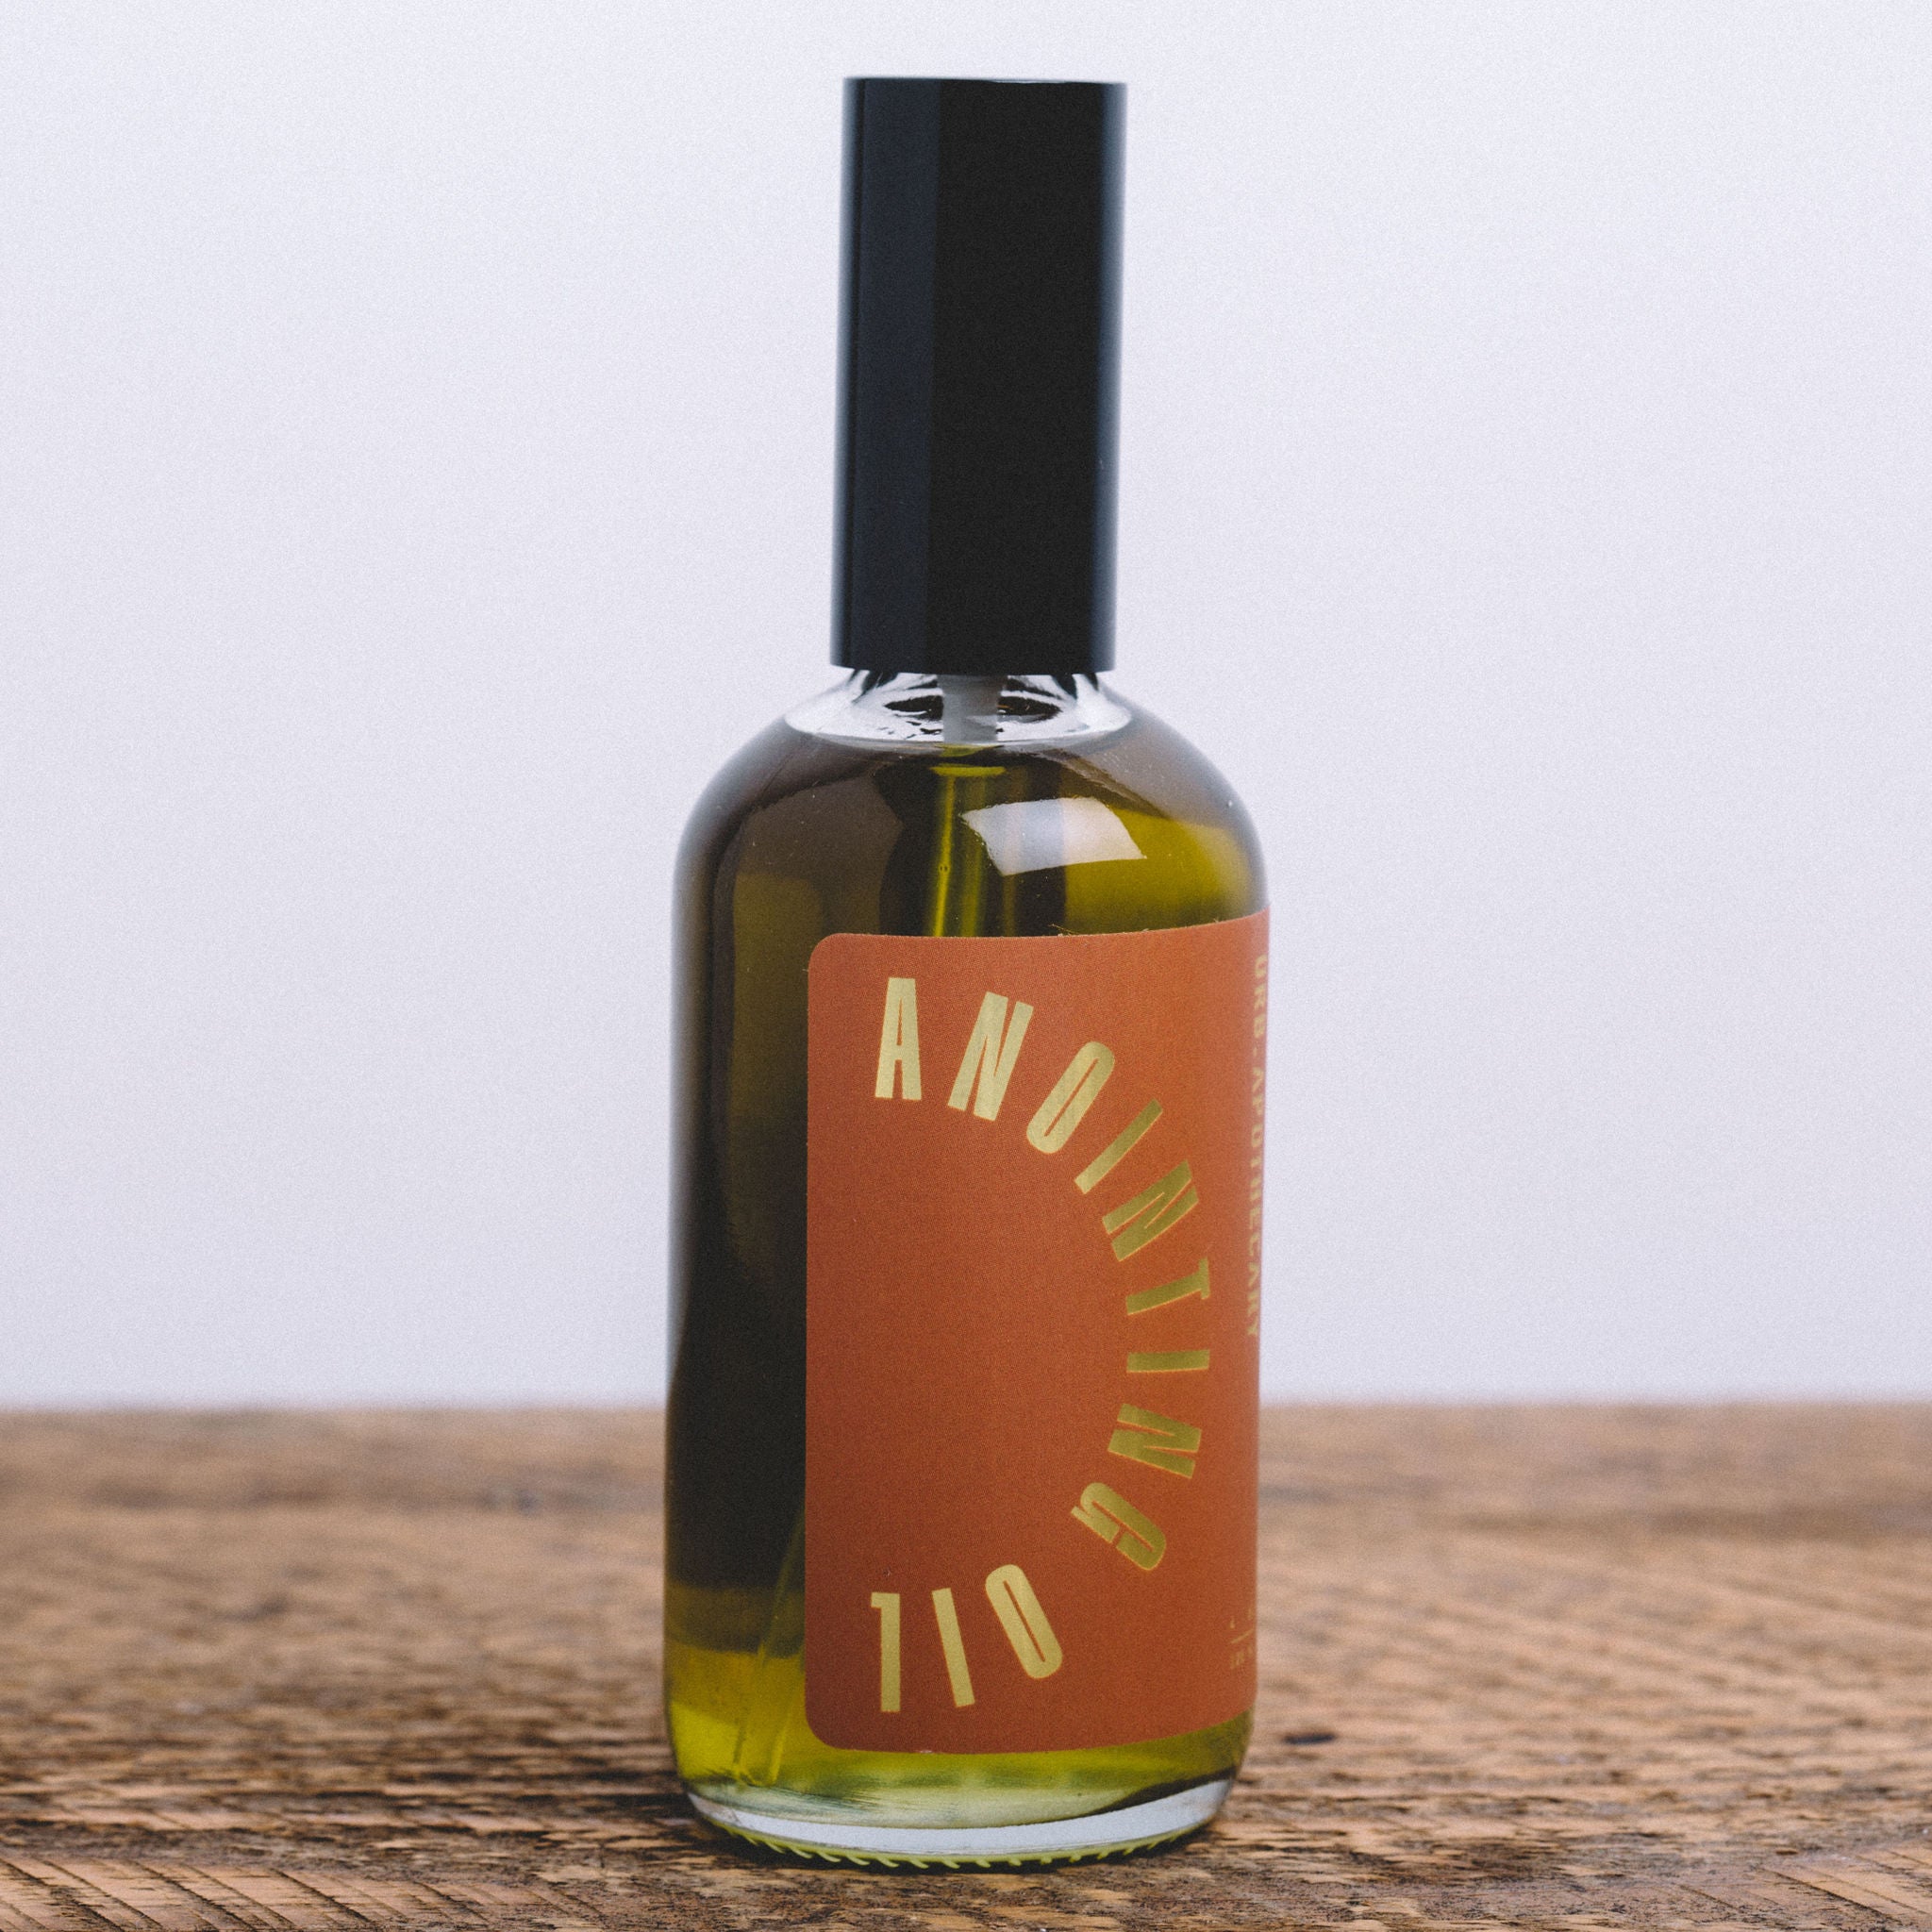 ANOINTING OIL || URB APOTHECARY